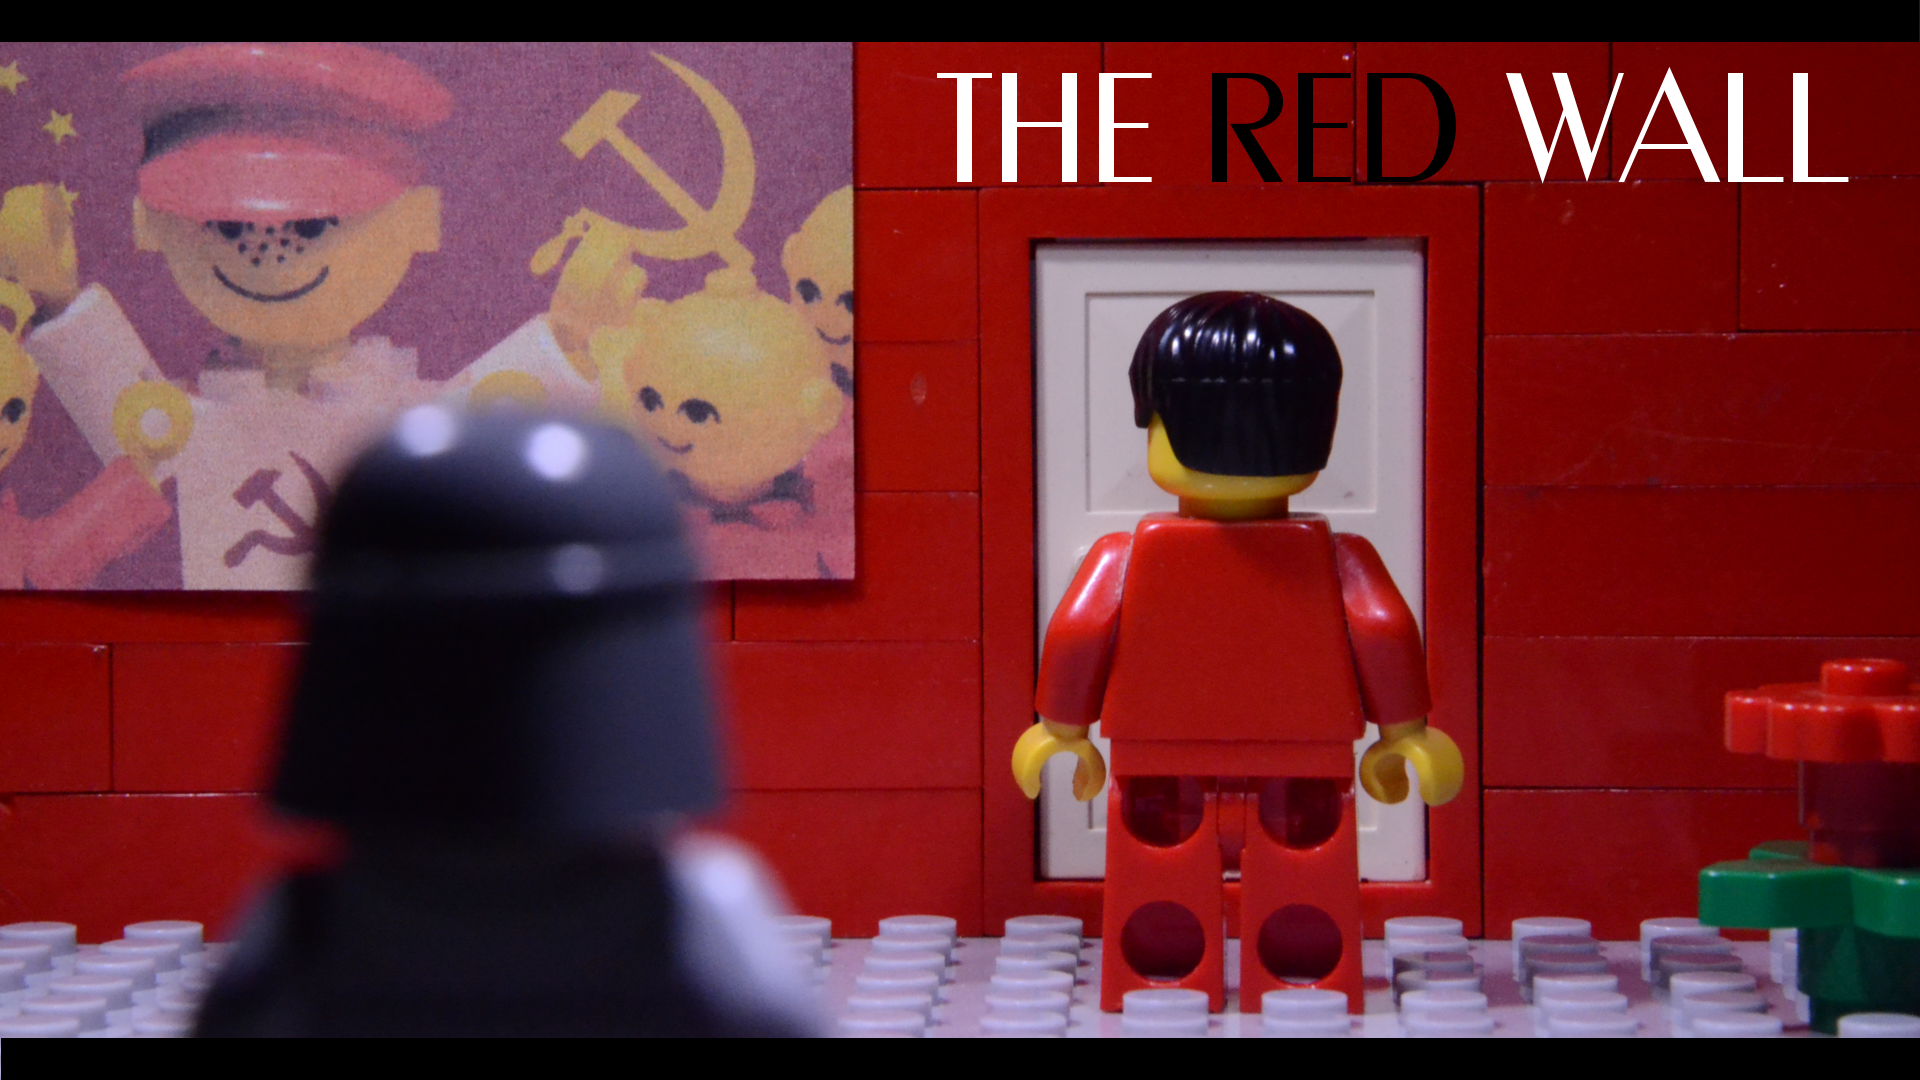 The Red Wall